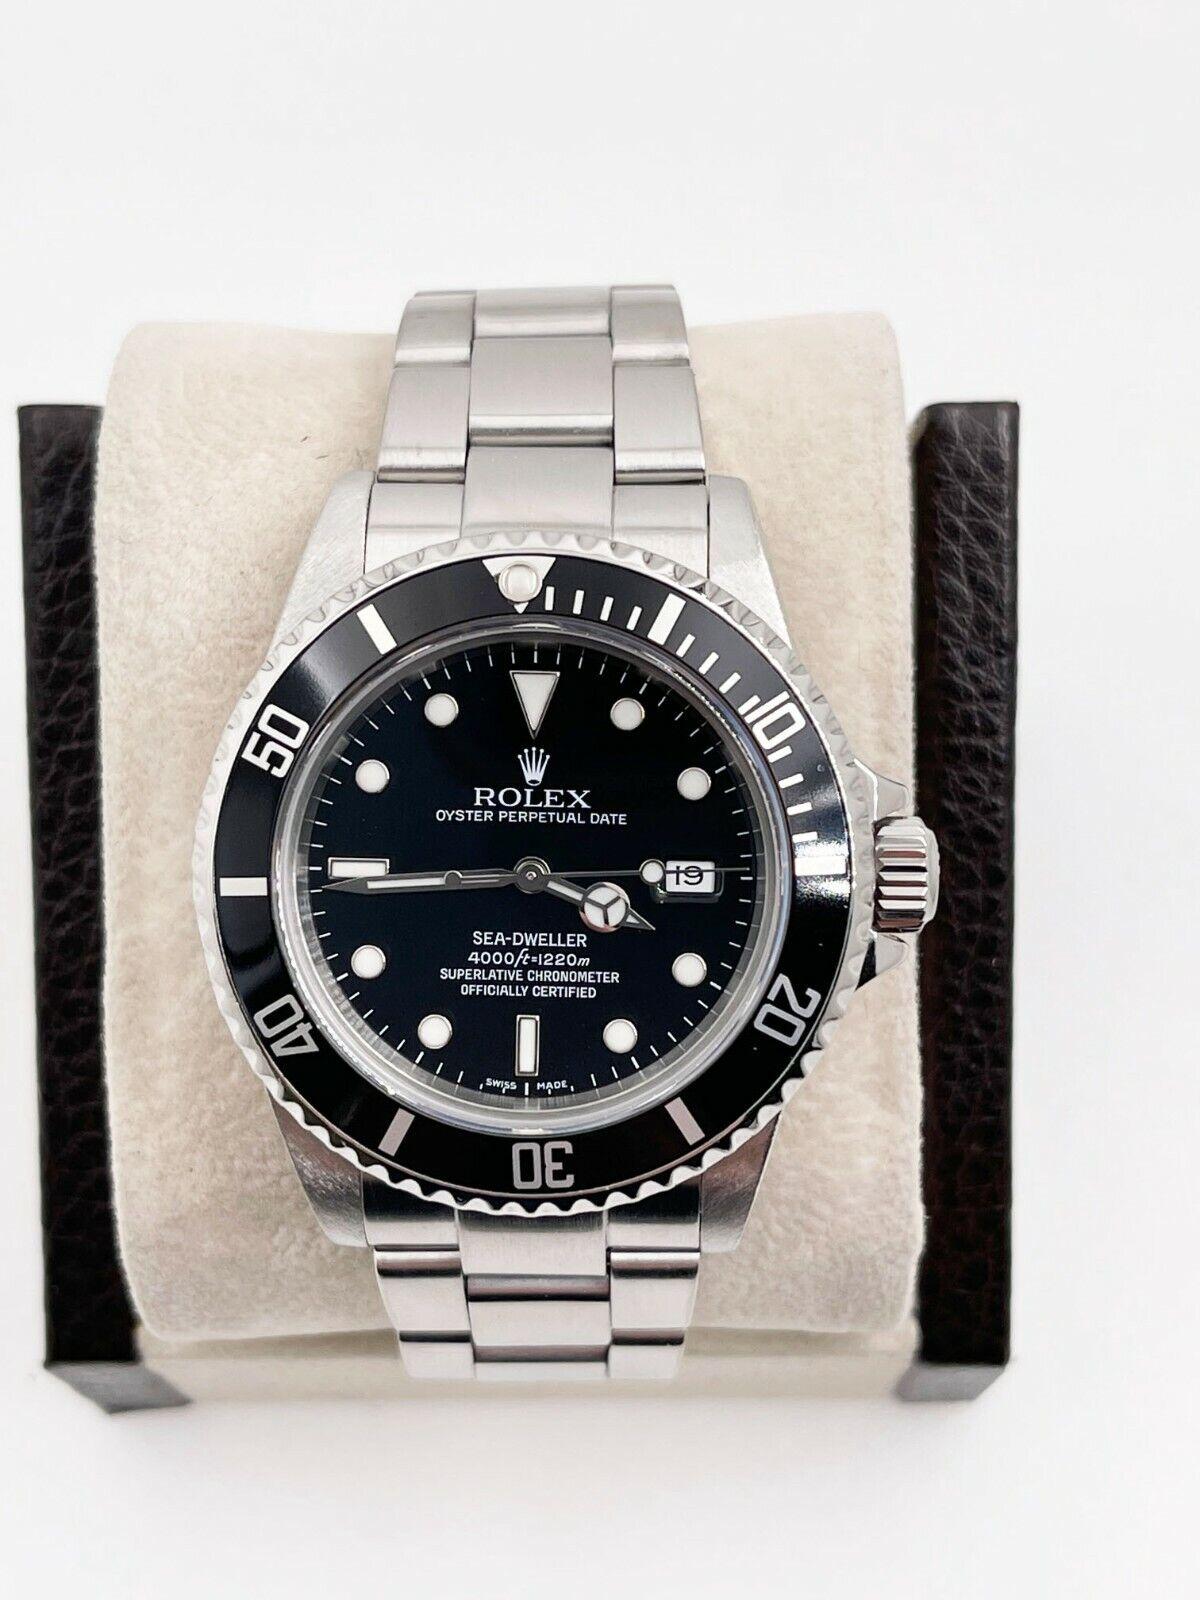 1984 Rolex Sea Dweller 16660 Black Dial Stainless Steel Box Service Paper For Sale 5